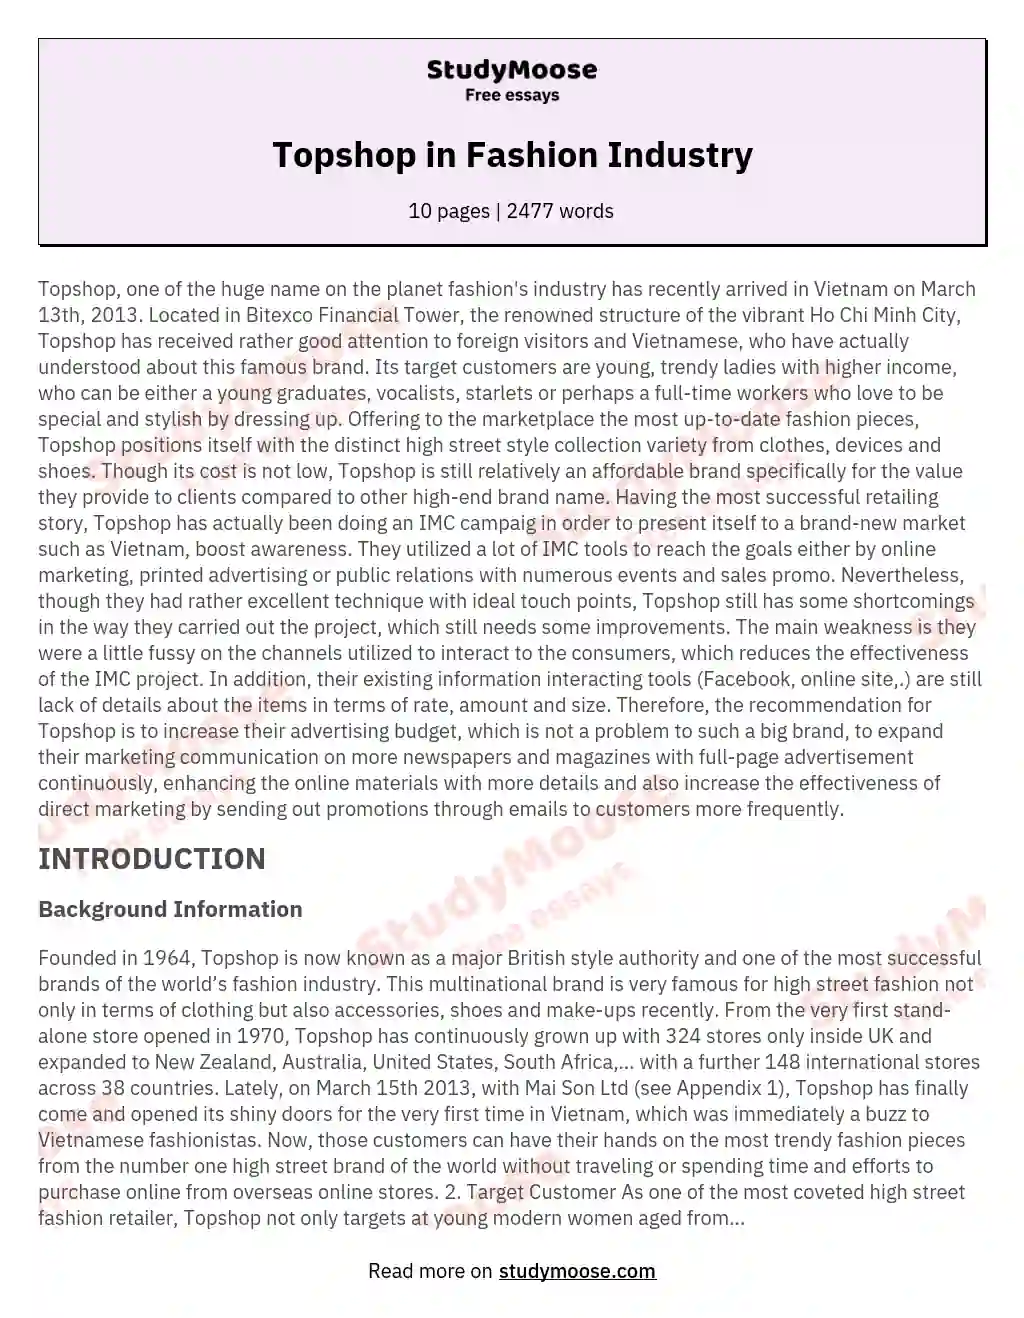 Topshop in Fashion Industry essay